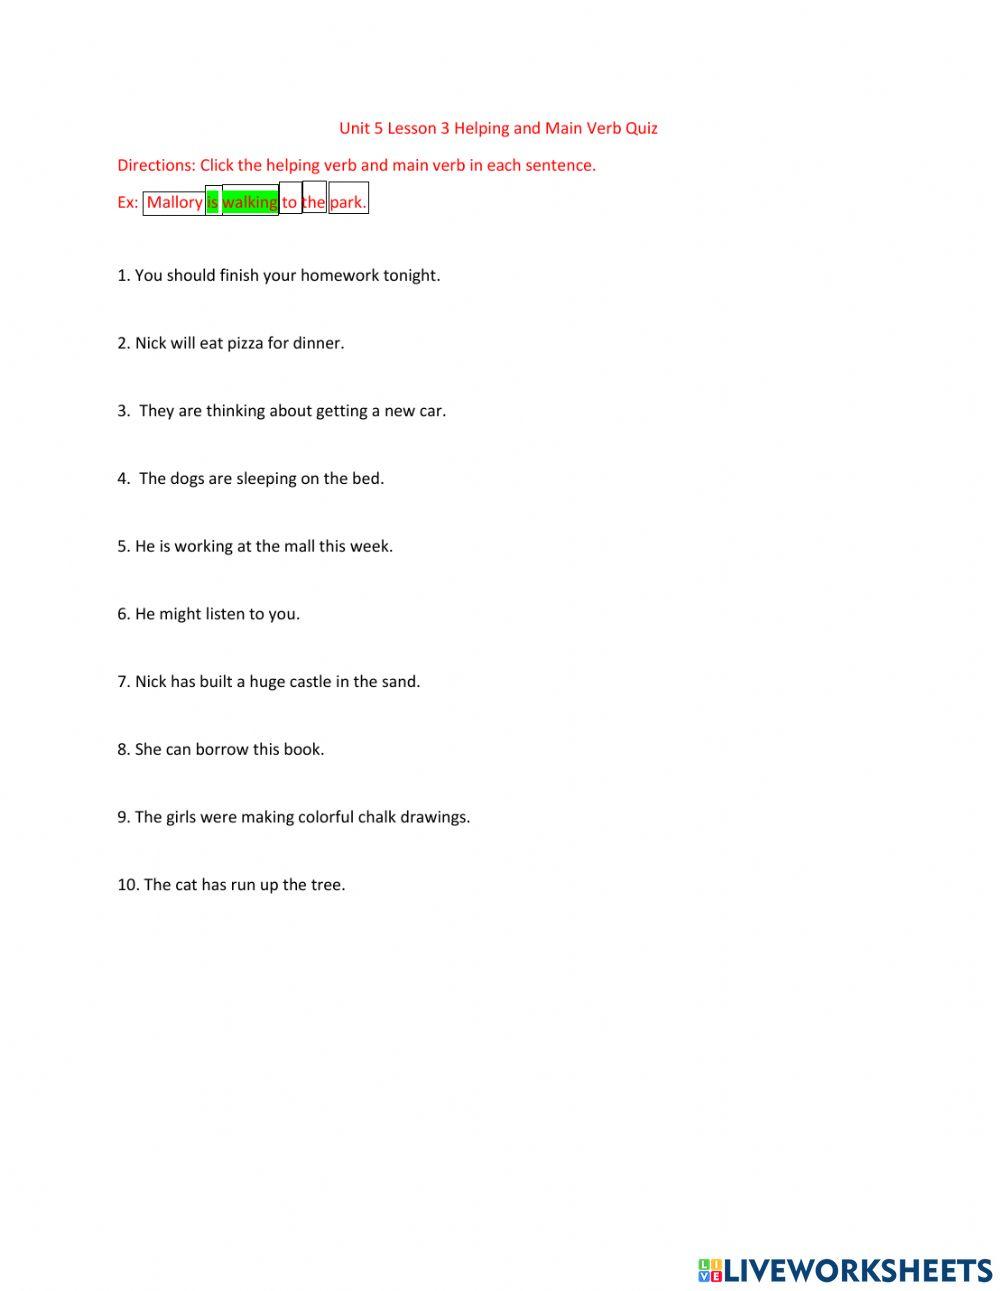 Unit 5 Lesson 3 Helping and Main Verb Quiz